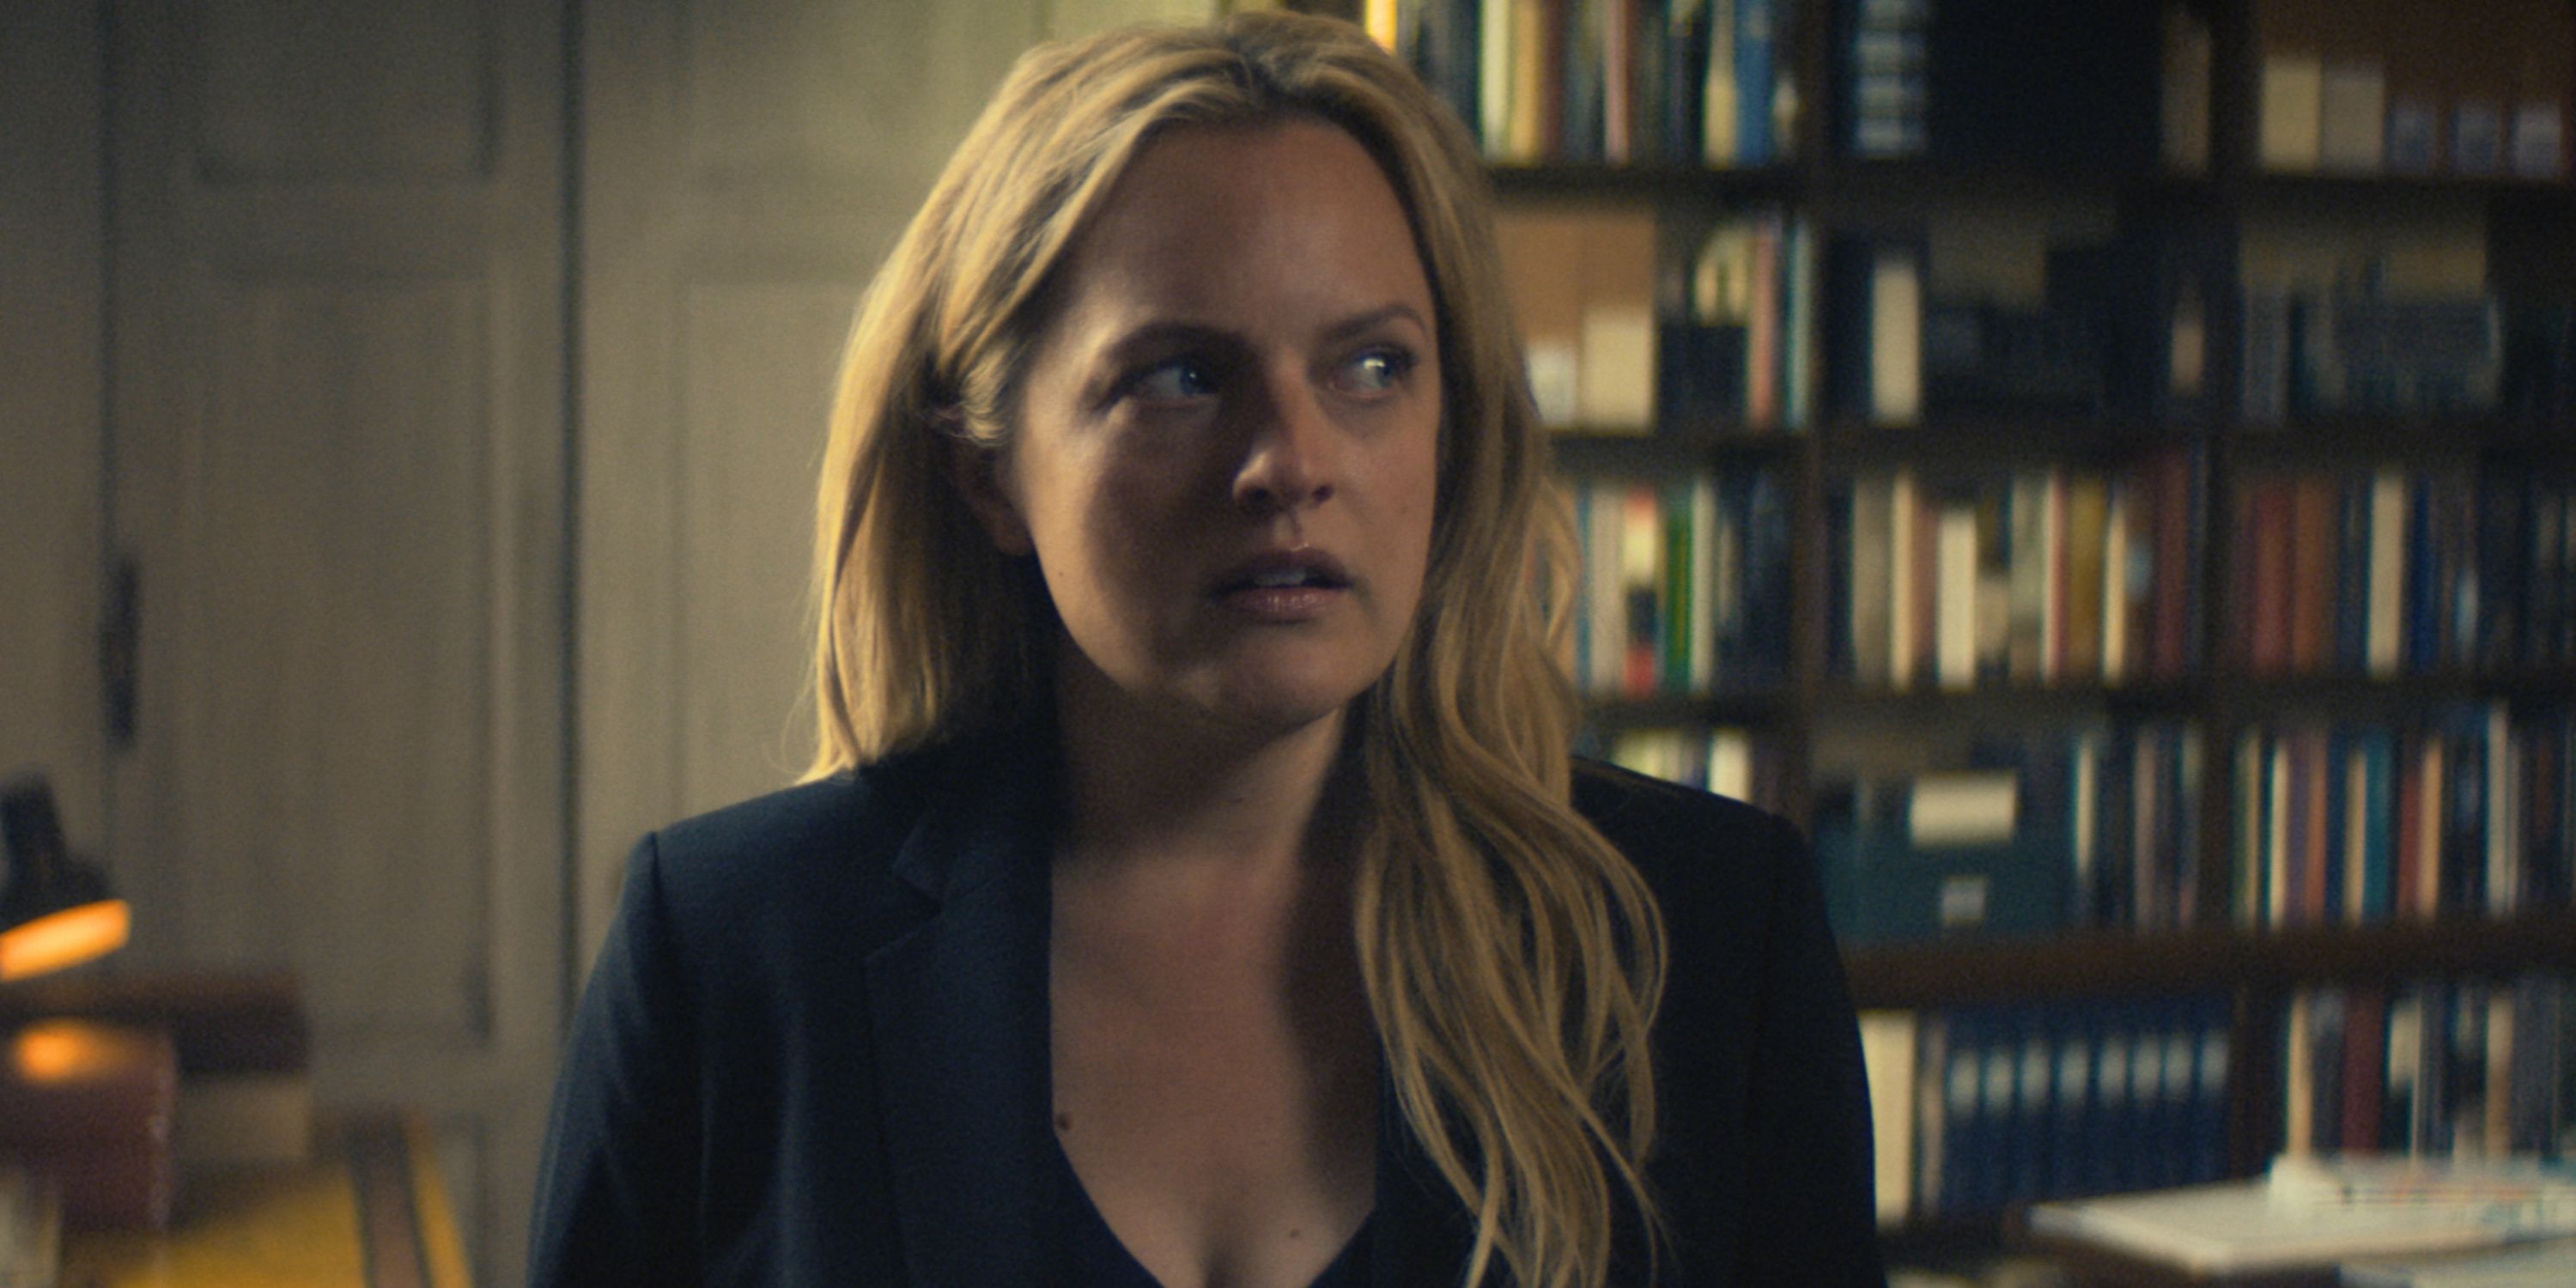 Elisabeth Moss as Imogen Salter looking off to the left in a black v-neck shirt and jacket in The Veil